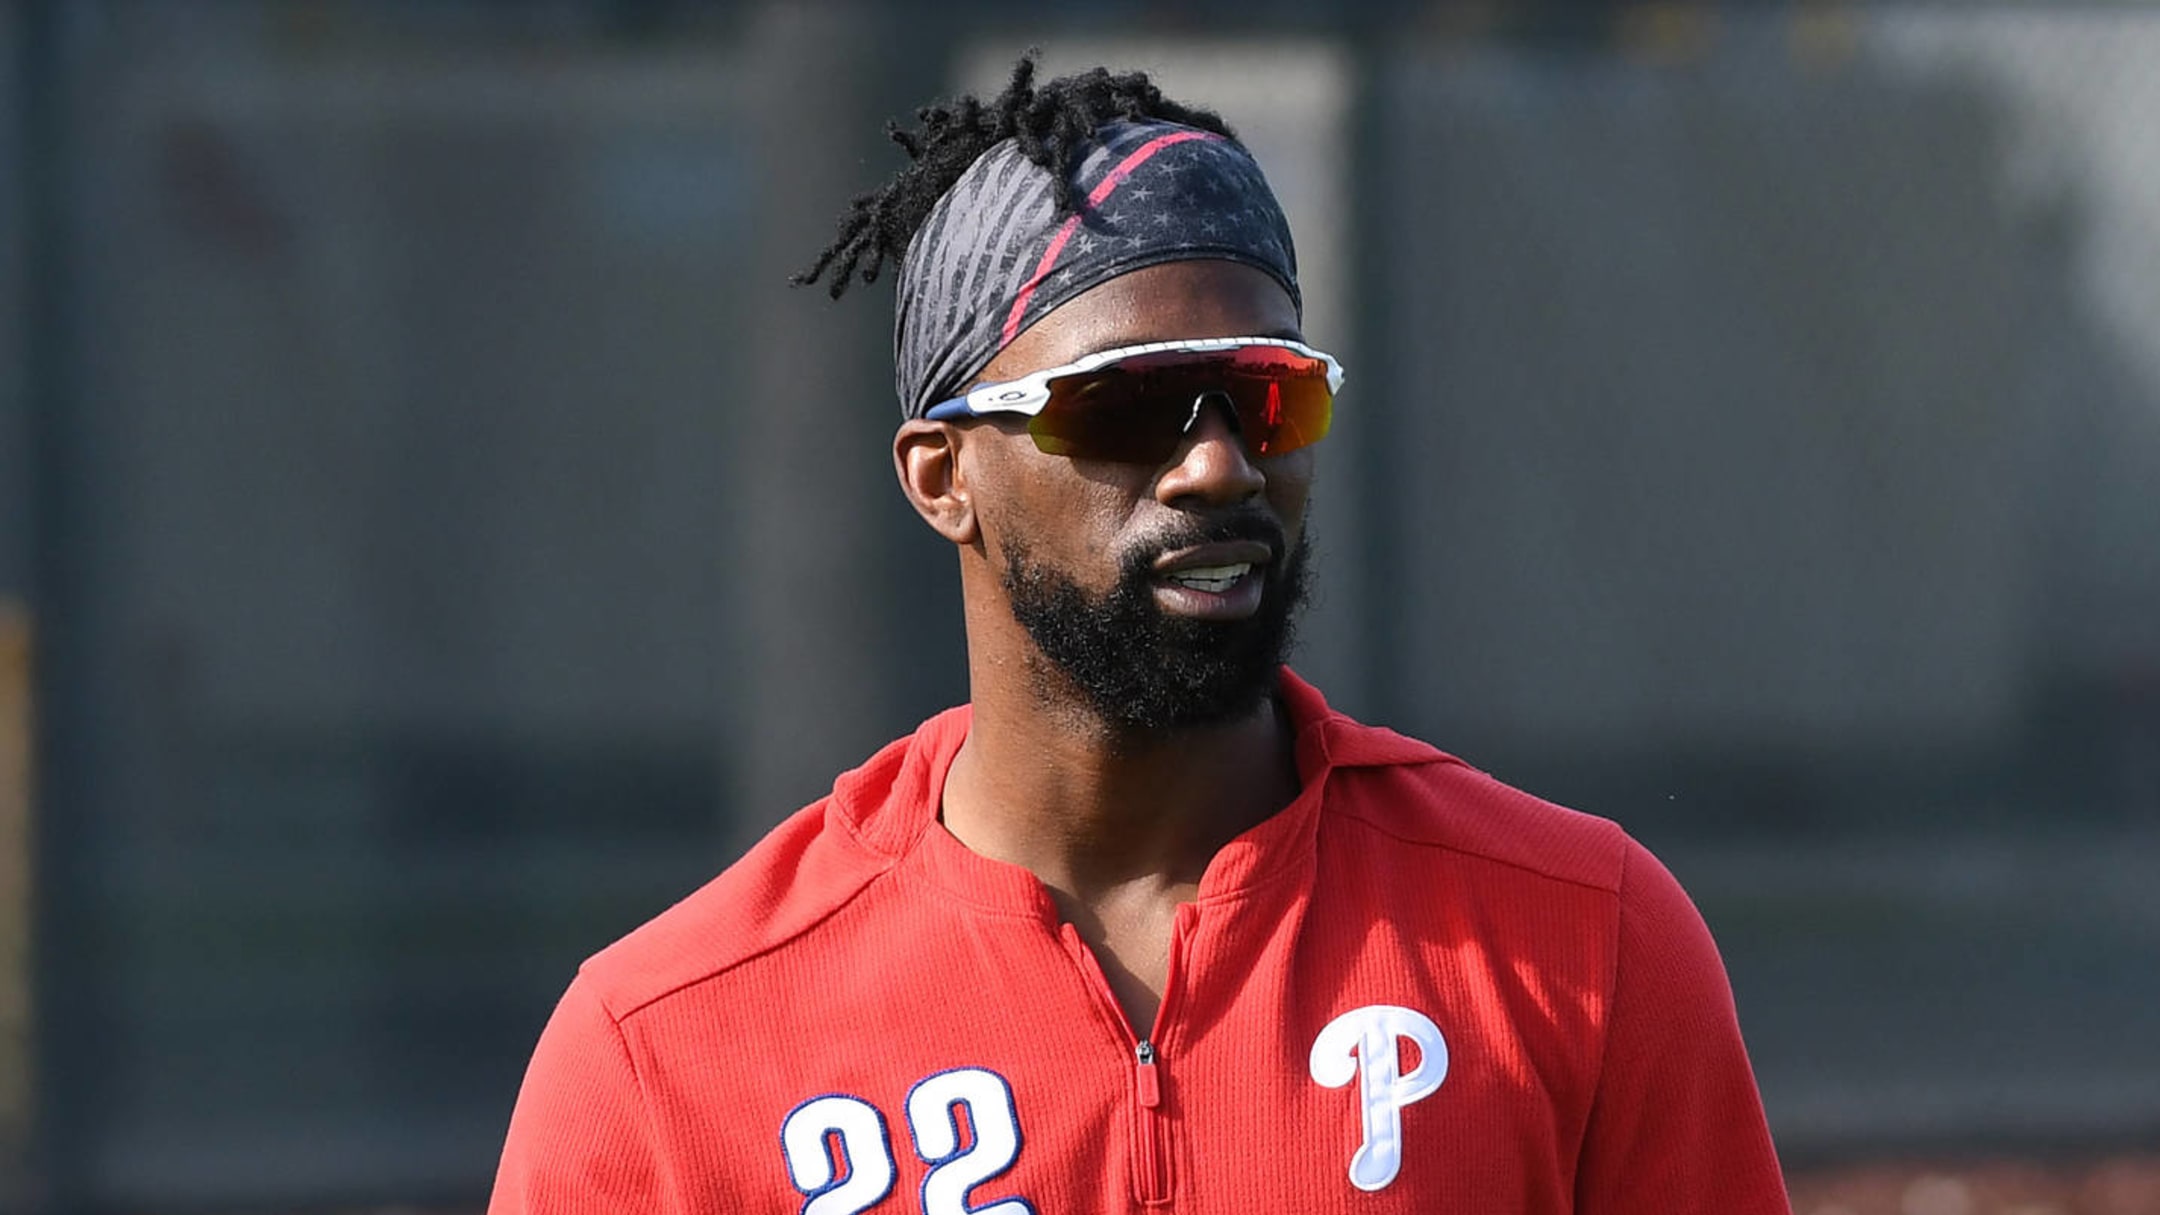 Andrew McCutchen has hilarious reaction to end of MLB lockout